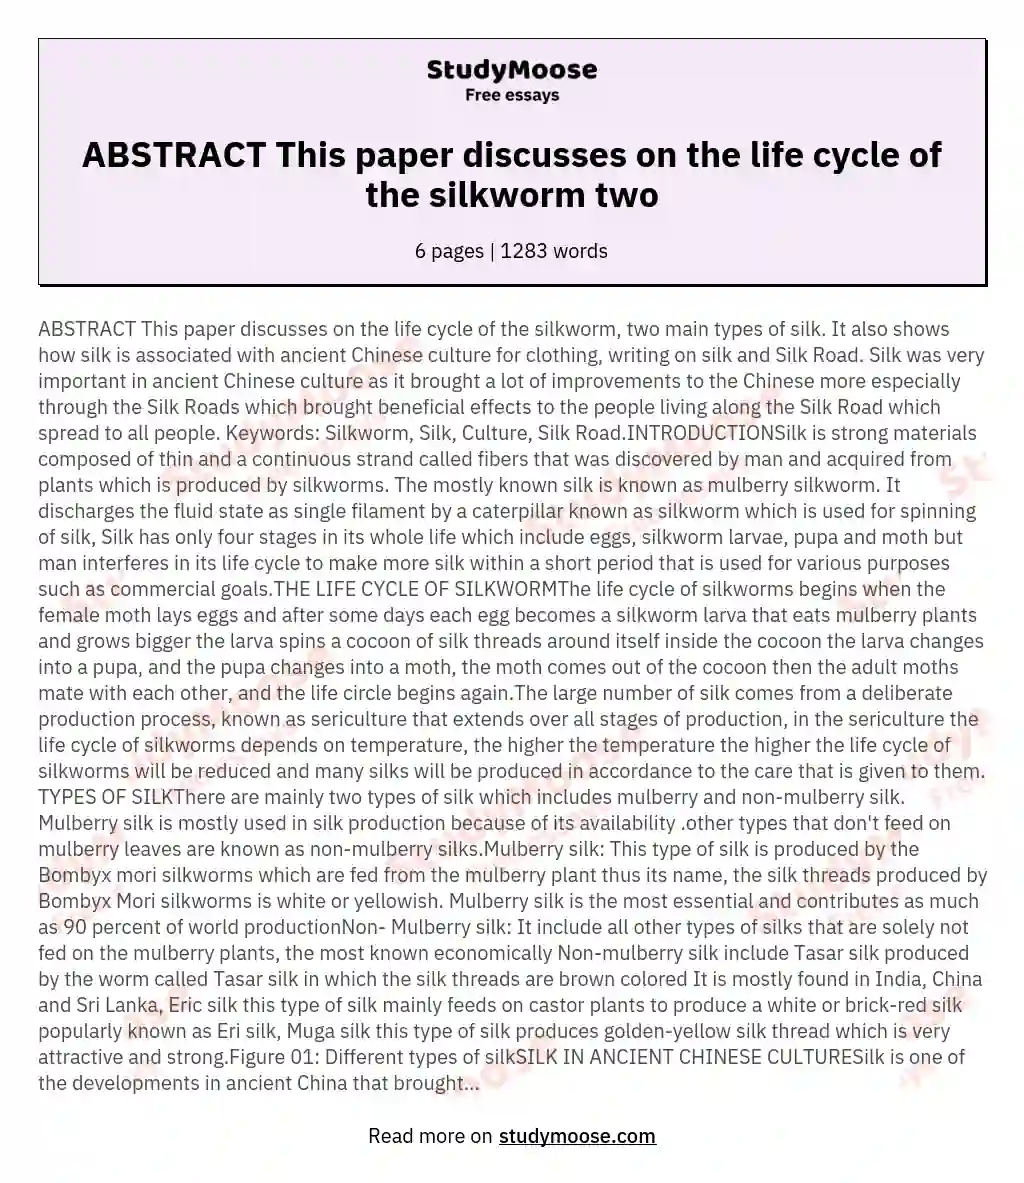 ABSTRACT This paper discusses on the life cycle of the silkworm two